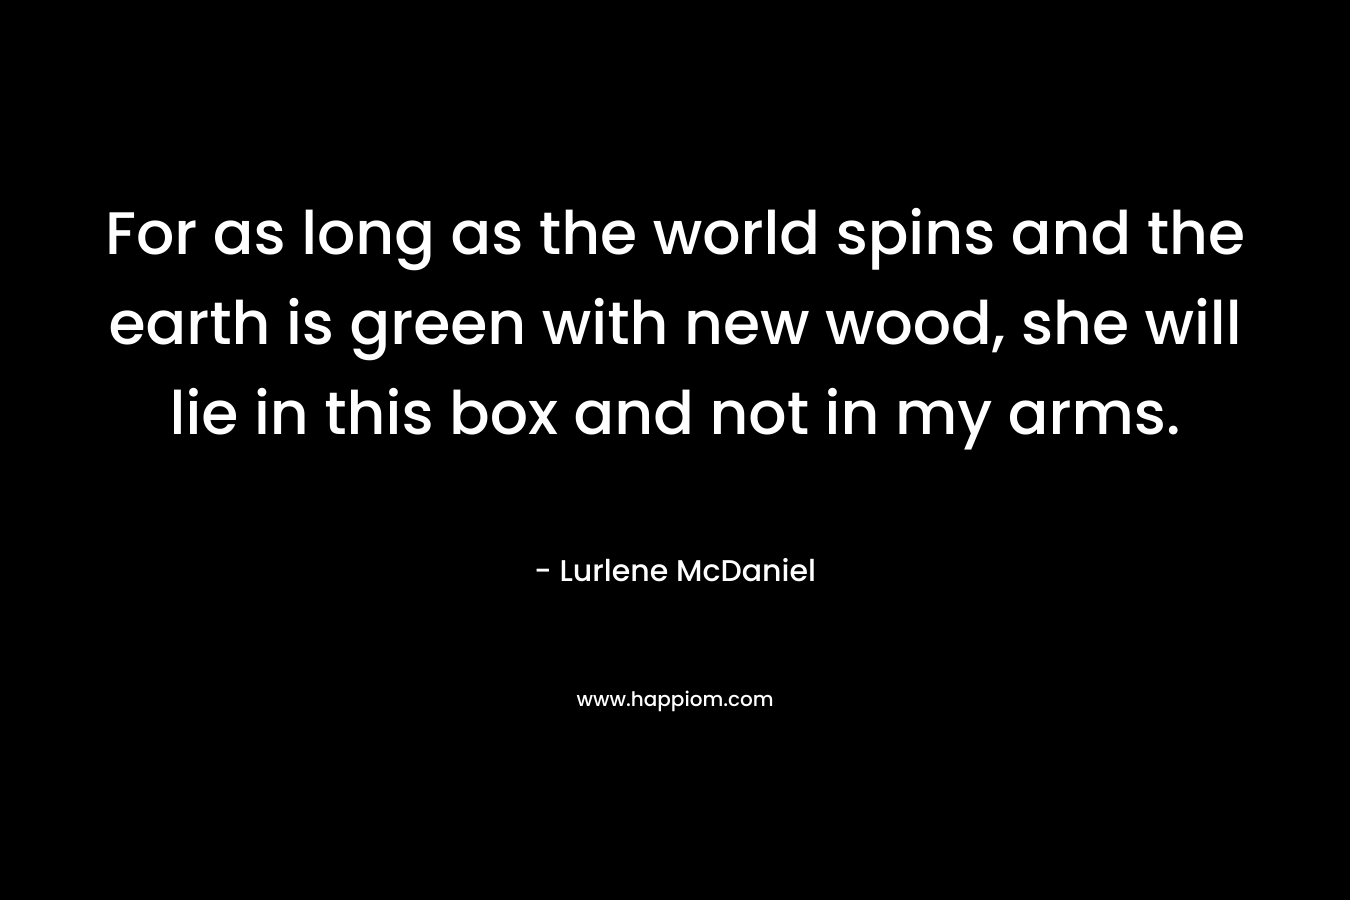 For as long as the world spins and the earth is green with new wood, she will lie in this box and not in my arms. – Lurlene McDaniel